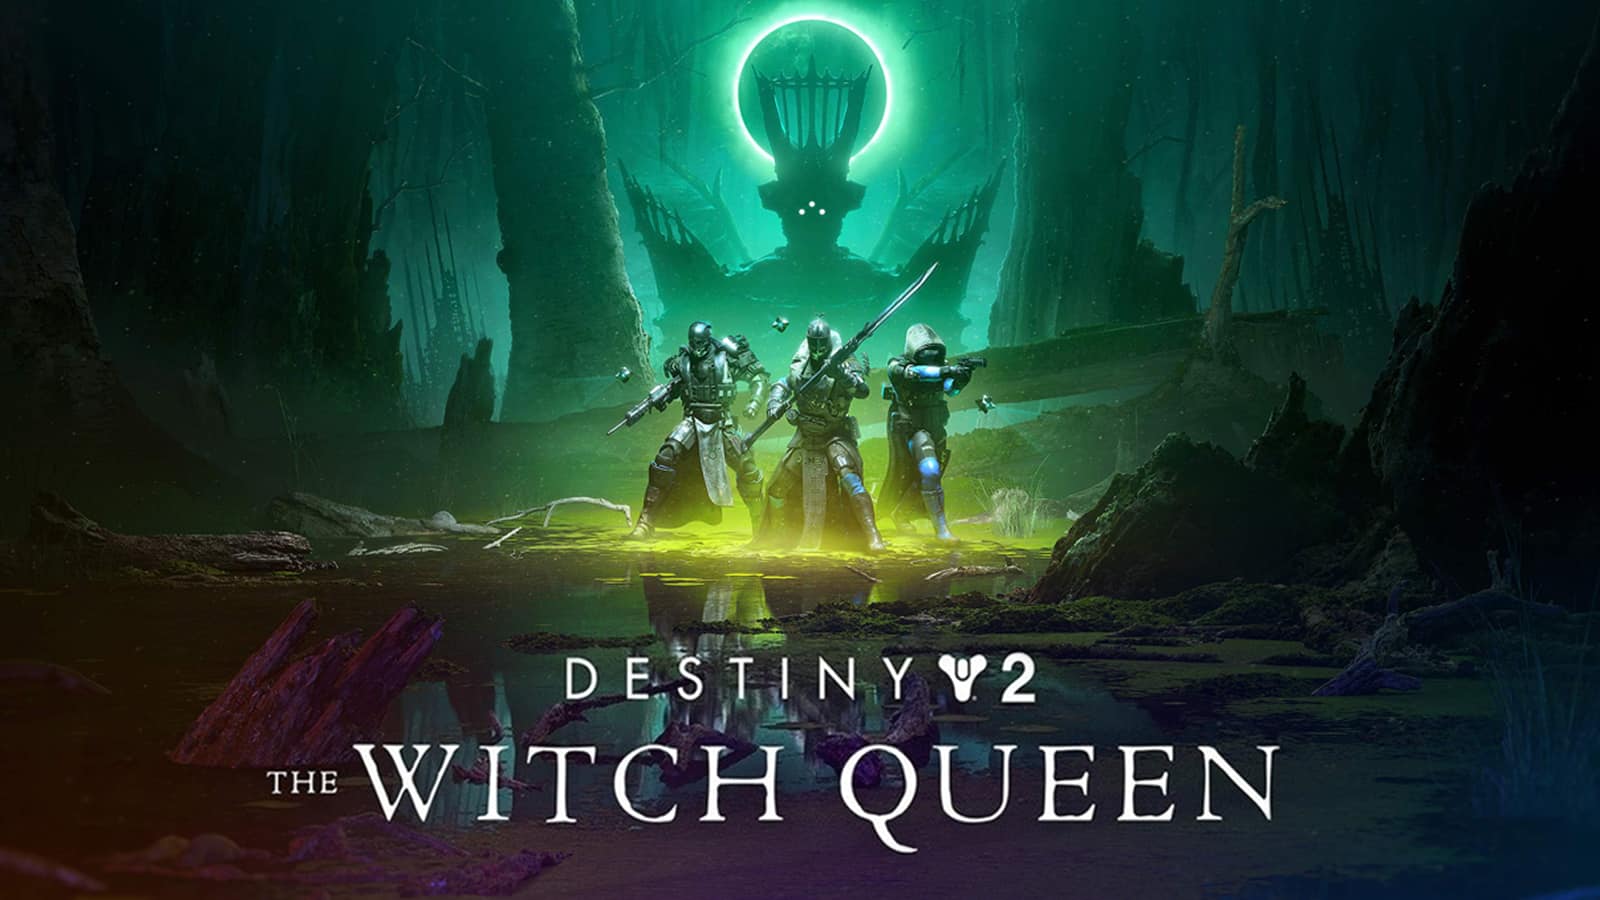 Destiny 2 The Witch Queen Expansion udgivelsesdato Savathun Story Trailer lækker mere